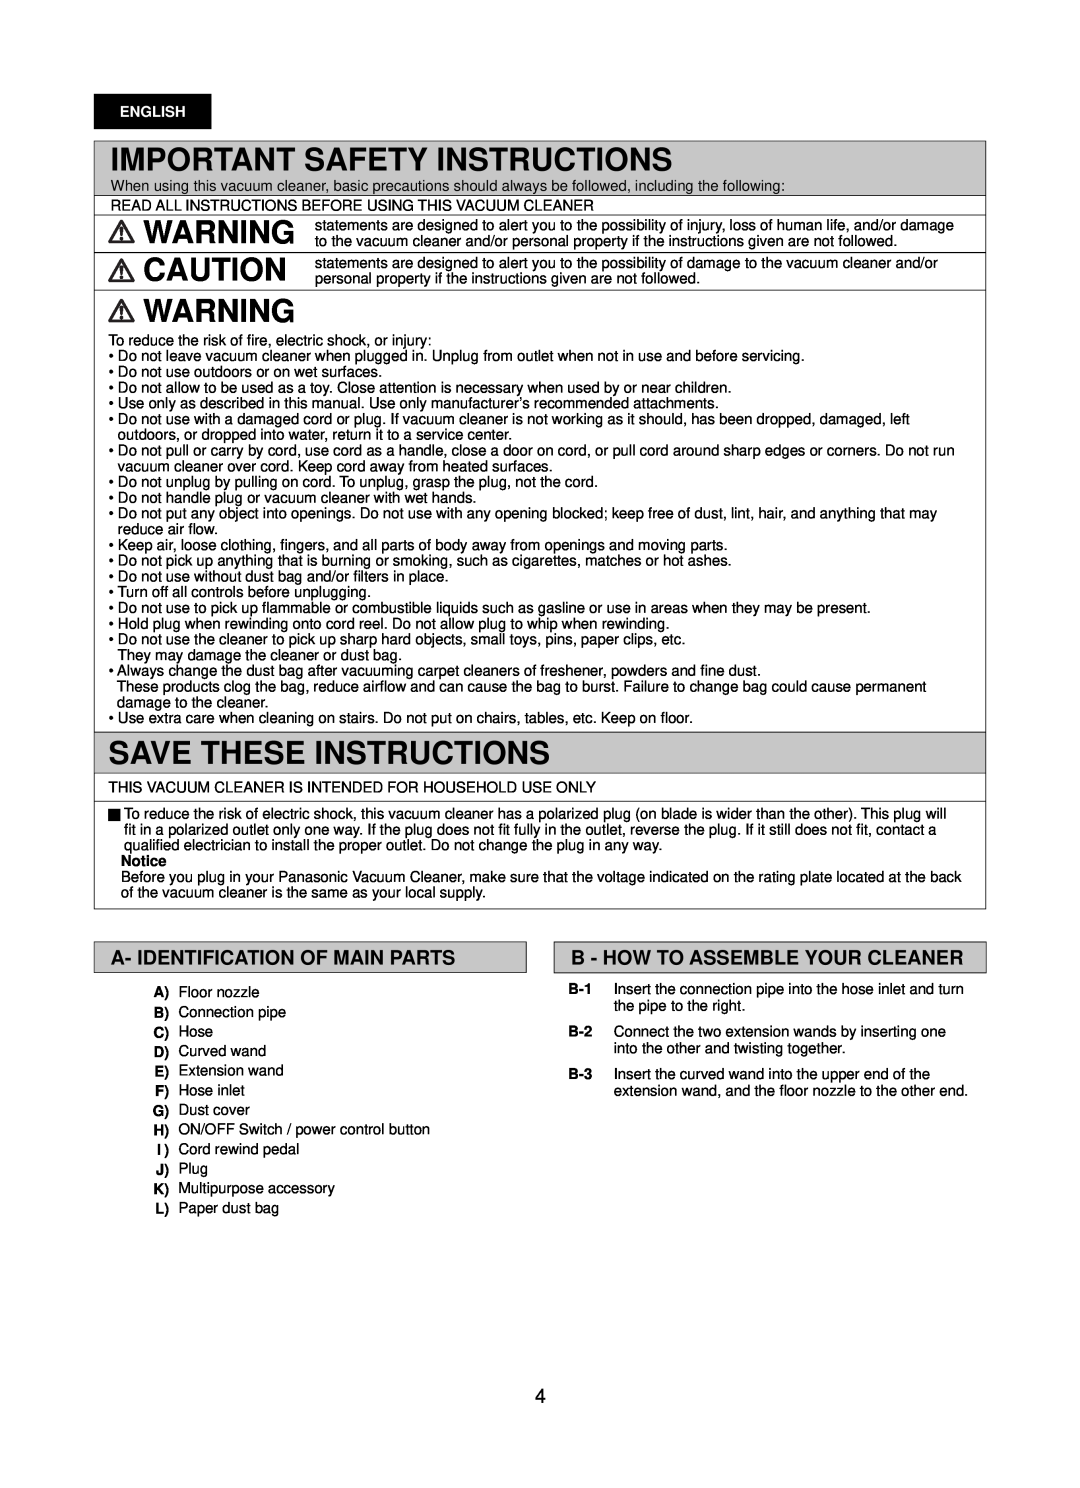 Panasonic Mccg381 Important Safety Instructions, Save These Instructions, A- Identification Of Main Parts, English 